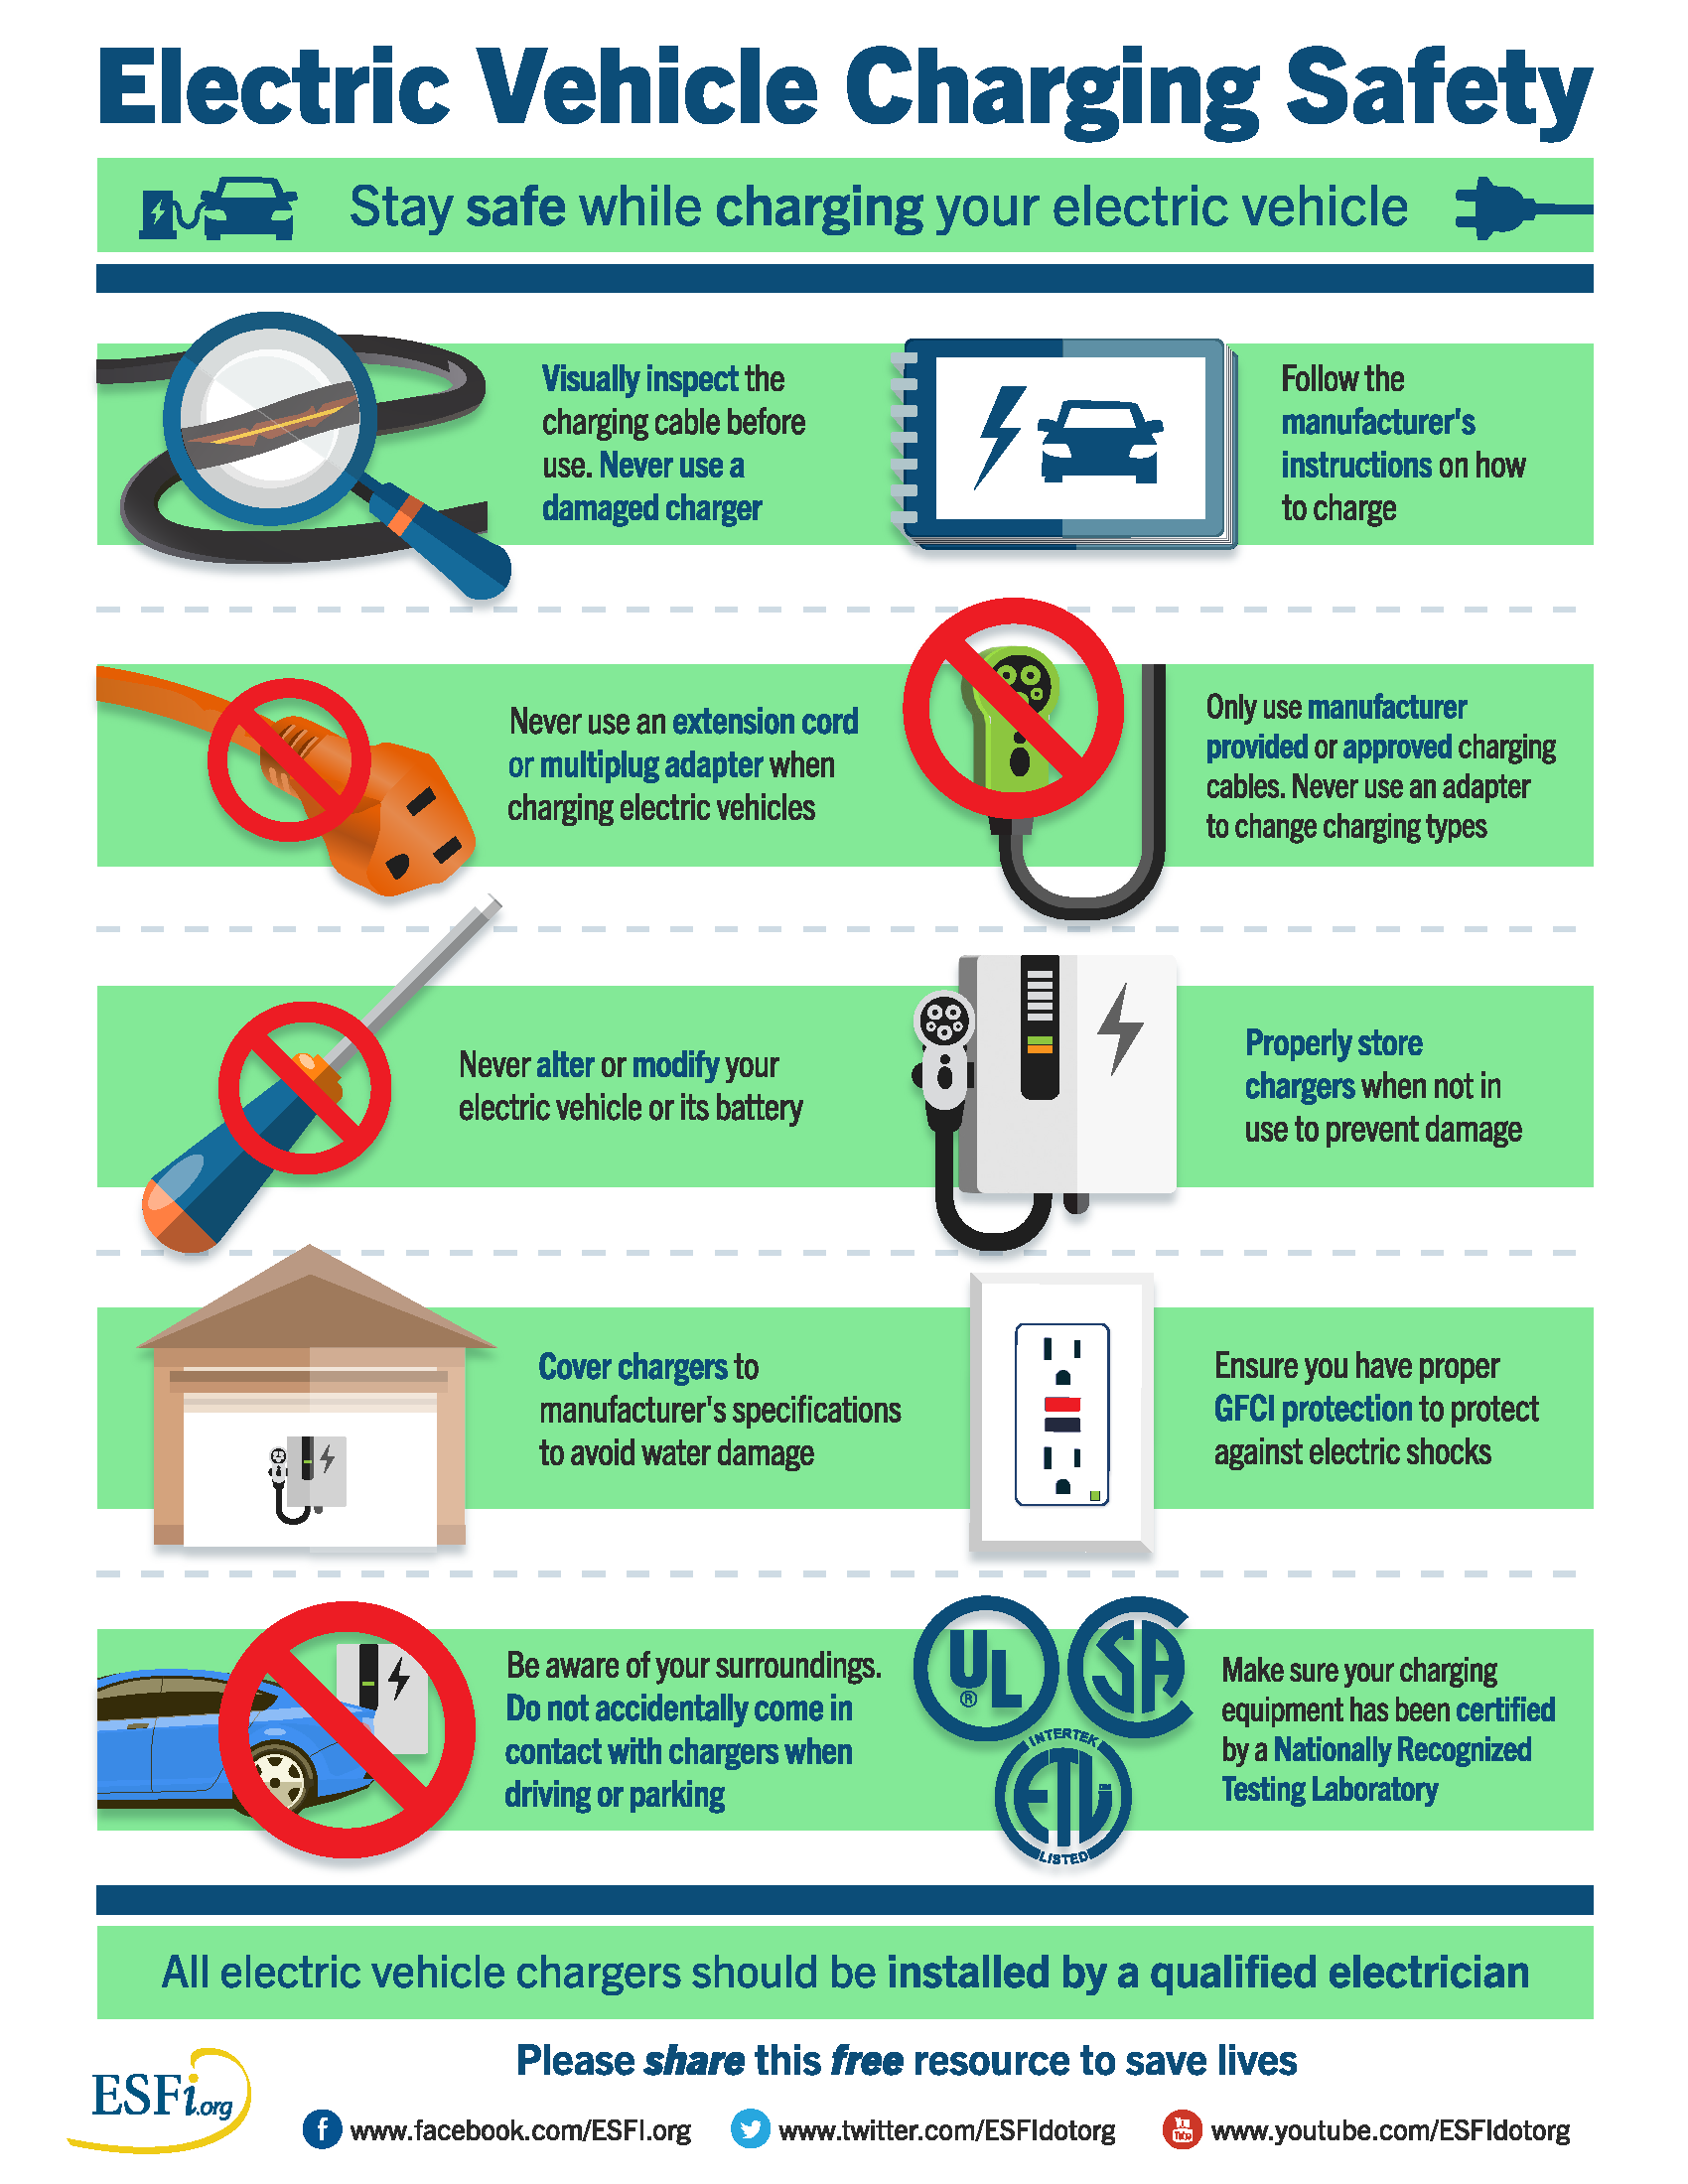 ESFI electric vehicle charging safety tips